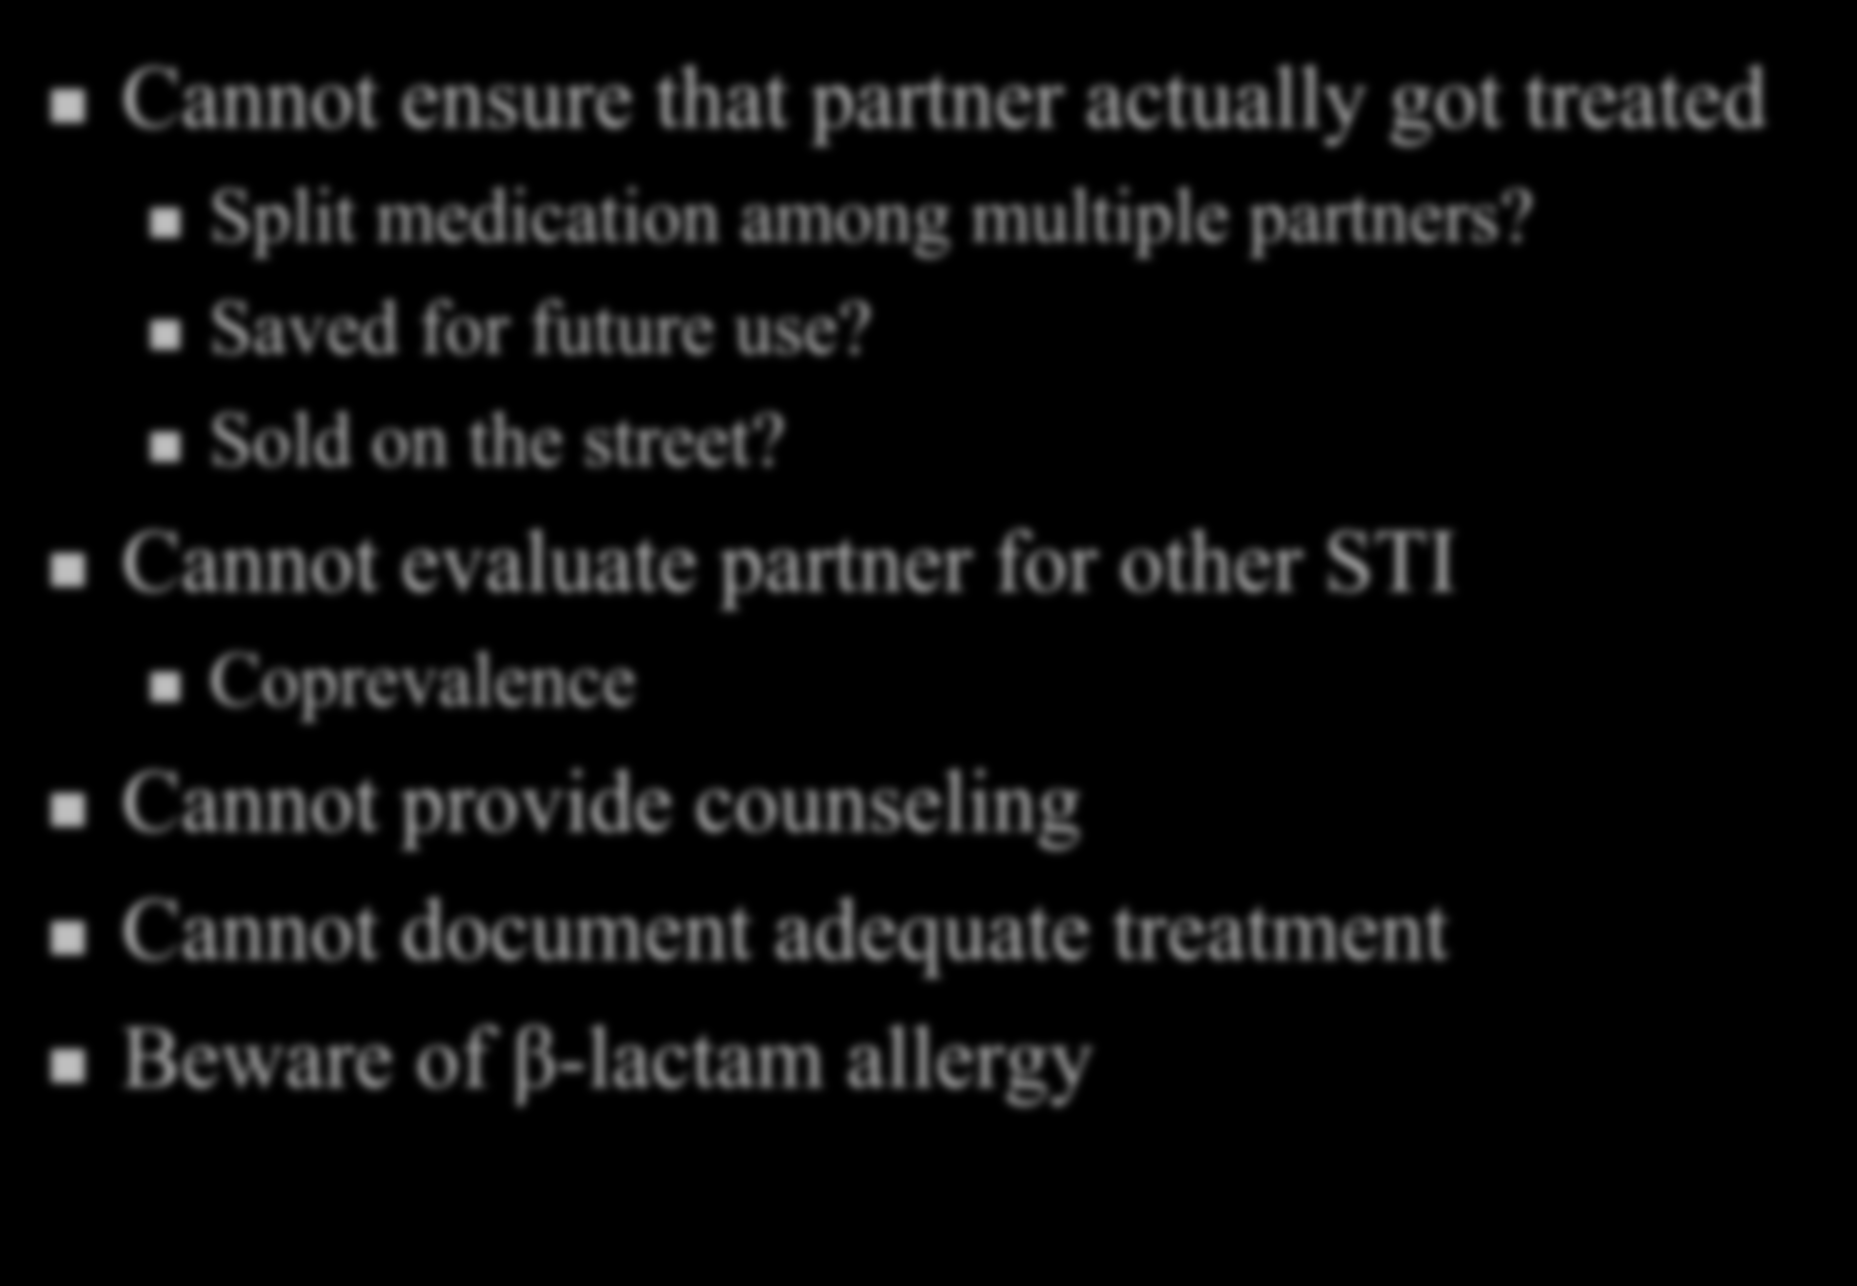 What are the downsides? Cannot ensure that partner actually got treated Split medication among multiple partners? Saved for future use?